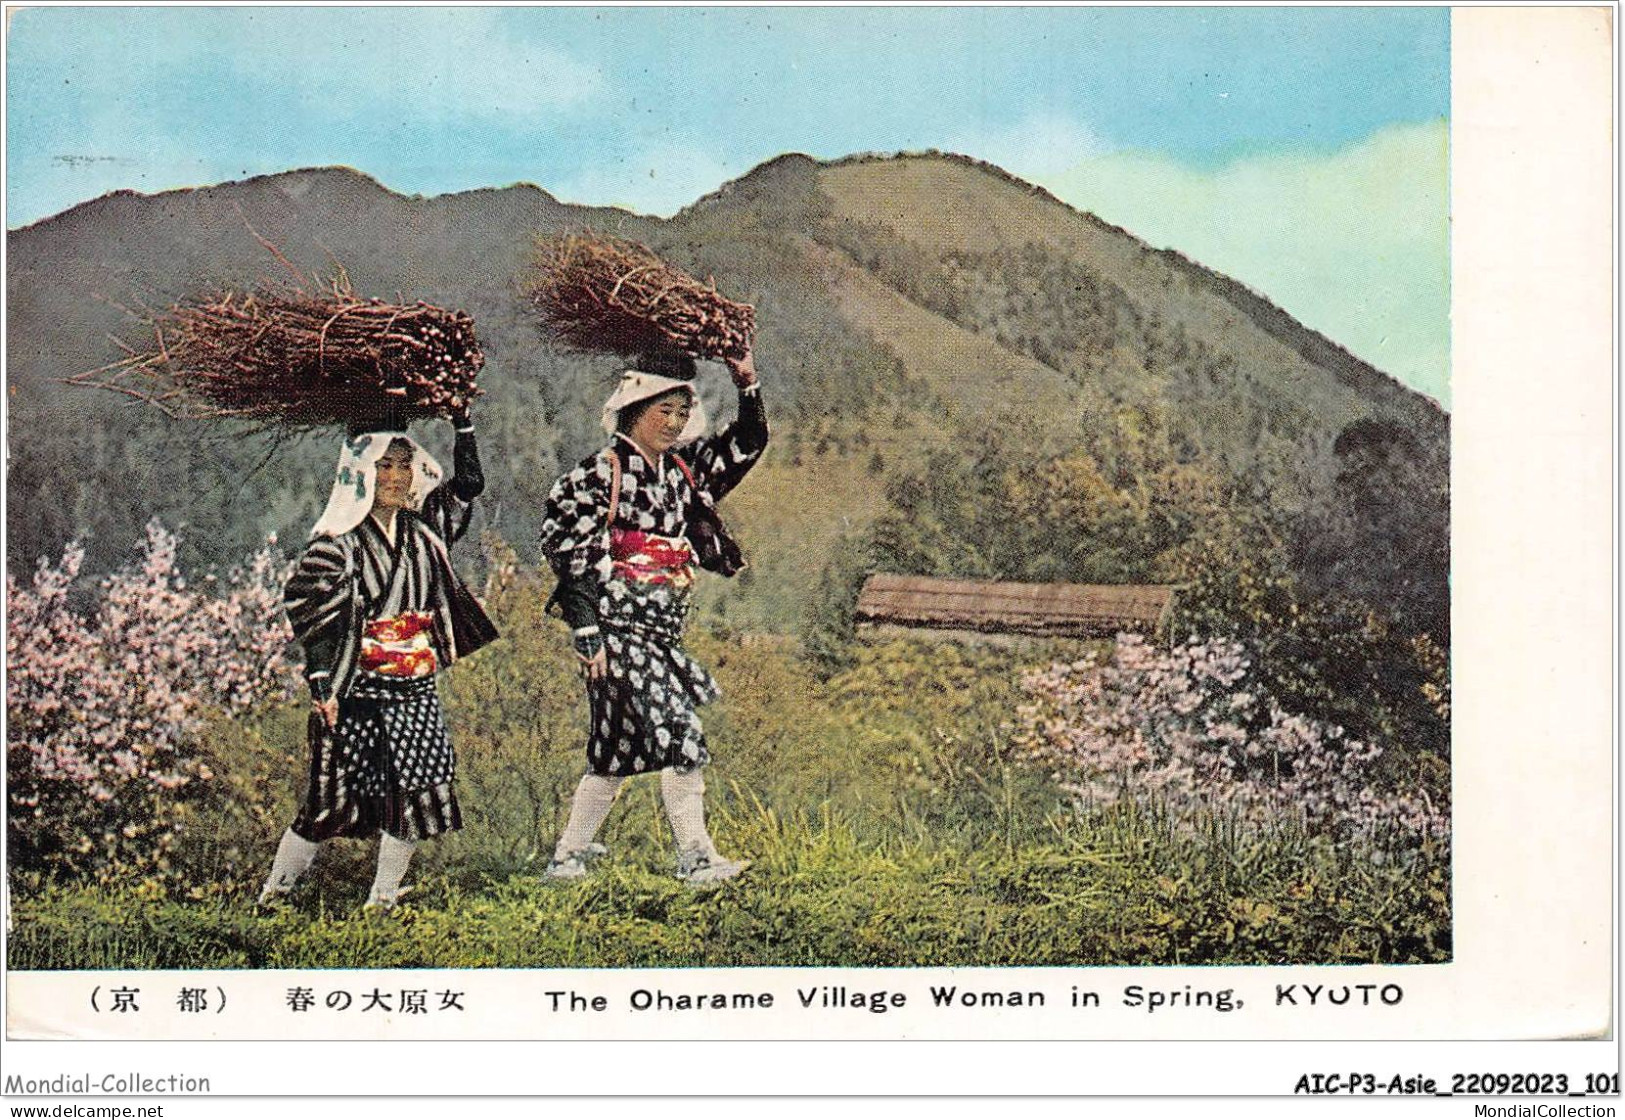 AICP3-ASIE-0305 - The Oharame Village Woman In Spring - KYOTO - Kyoto